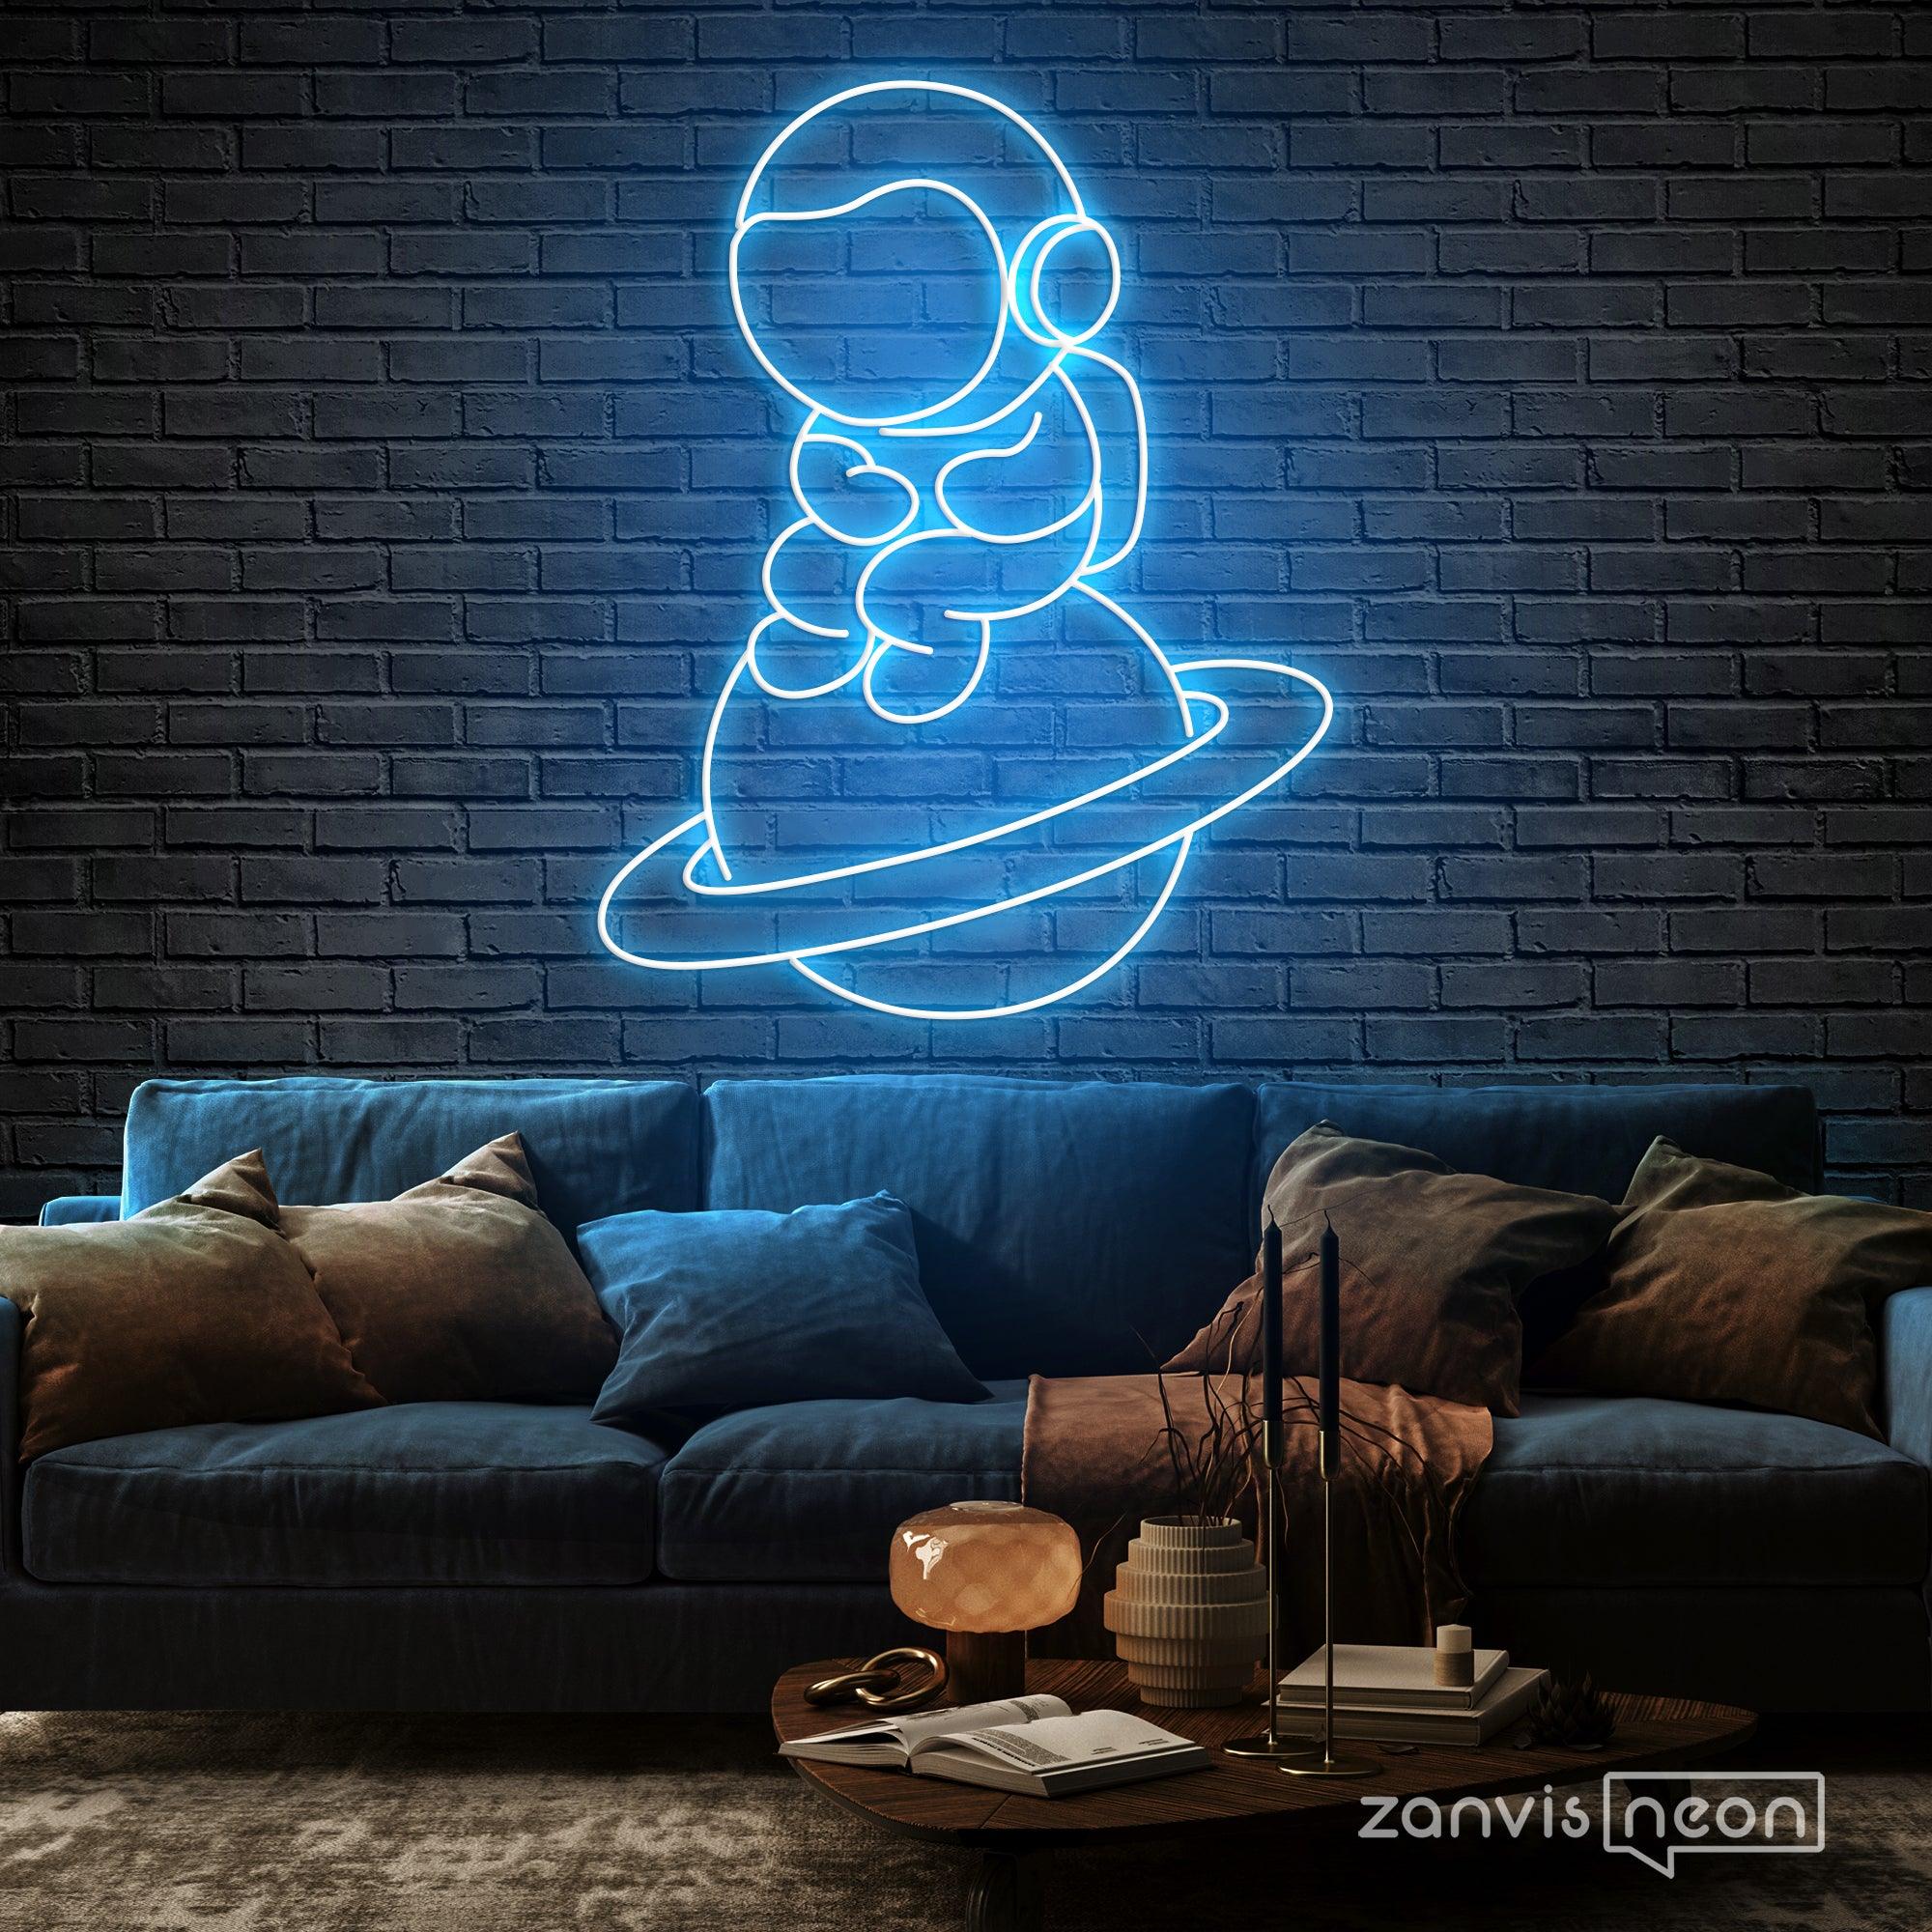 Lonely Astronaut Neon Sign - Custom Neon Signs | LED Neon Signs | Zanvis Neon®